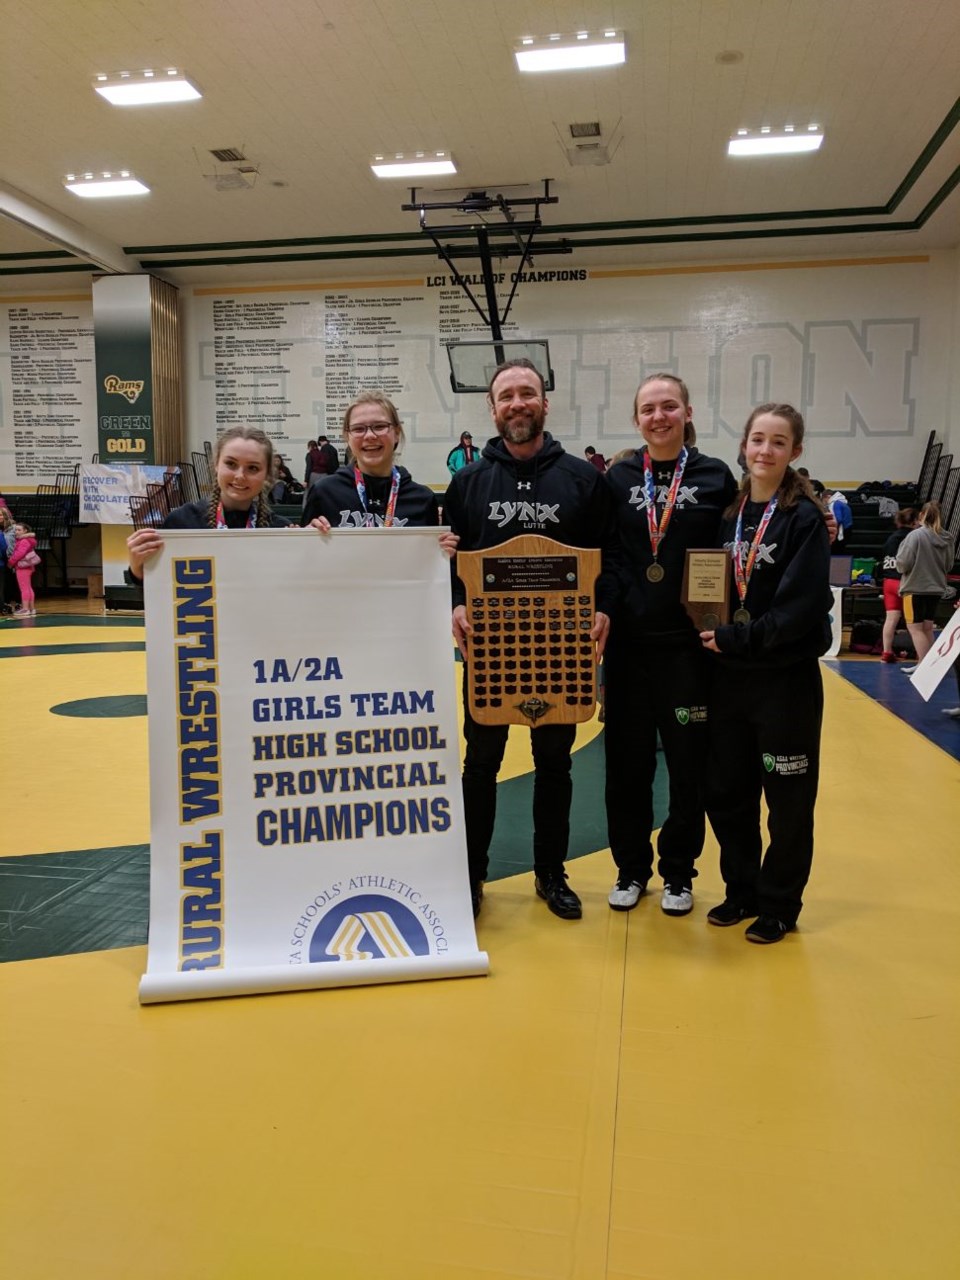  Ecole Beausejour students won the ASAA Rural Provincial Banner- Left to Right Holly Dulmage, Danyelle Bouvier, Daarcy Plamondon, Emilee Gauthier. Sierra Cloutier School champs!